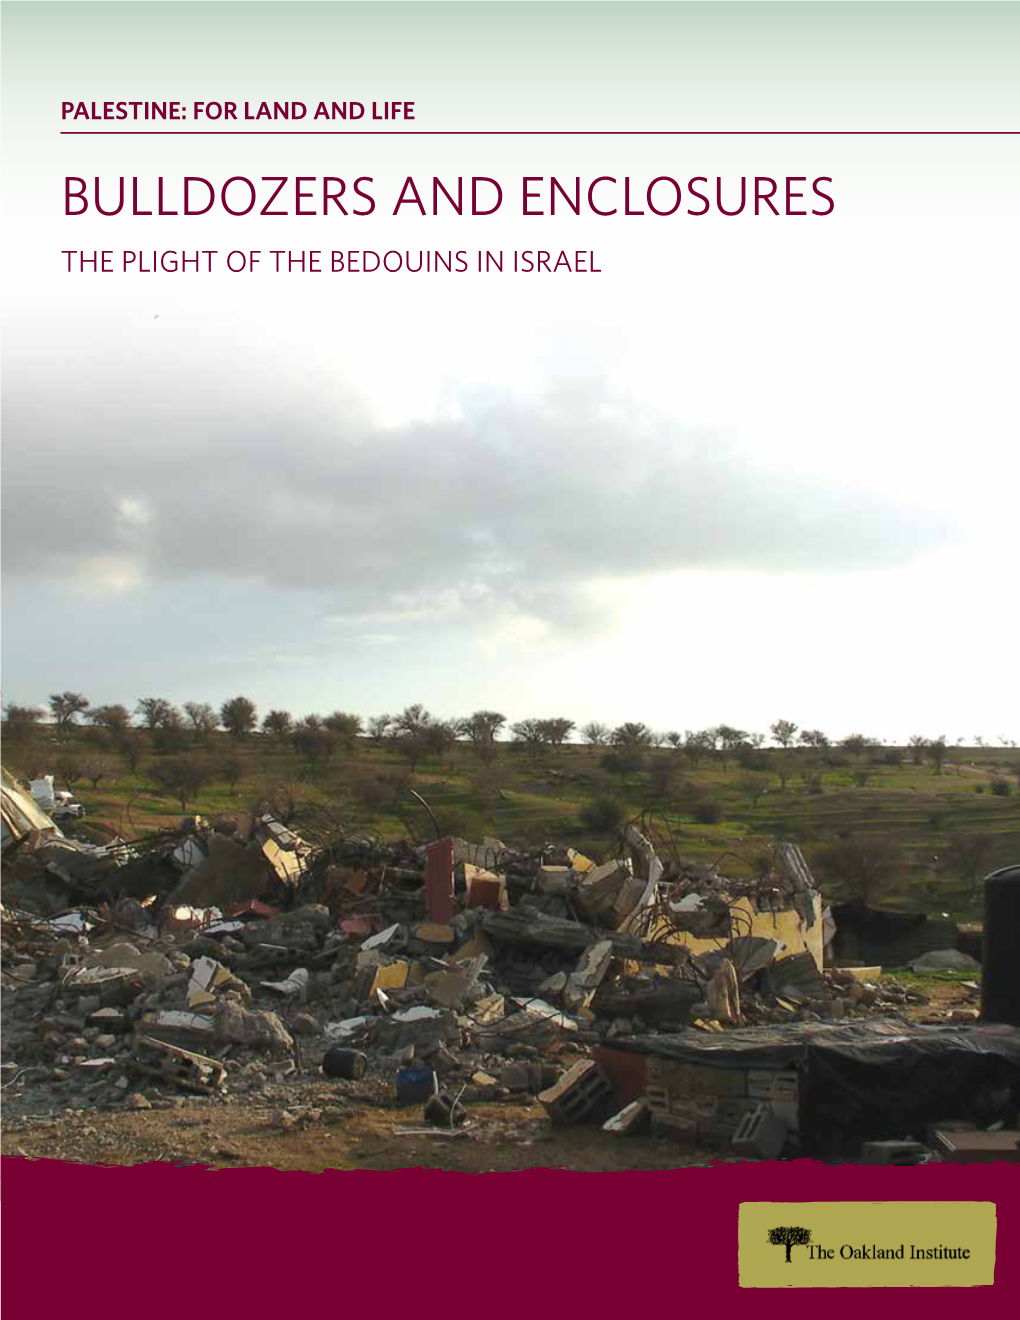 Bulldozers and Enclosures: the Plight of the Bedouins in Israel